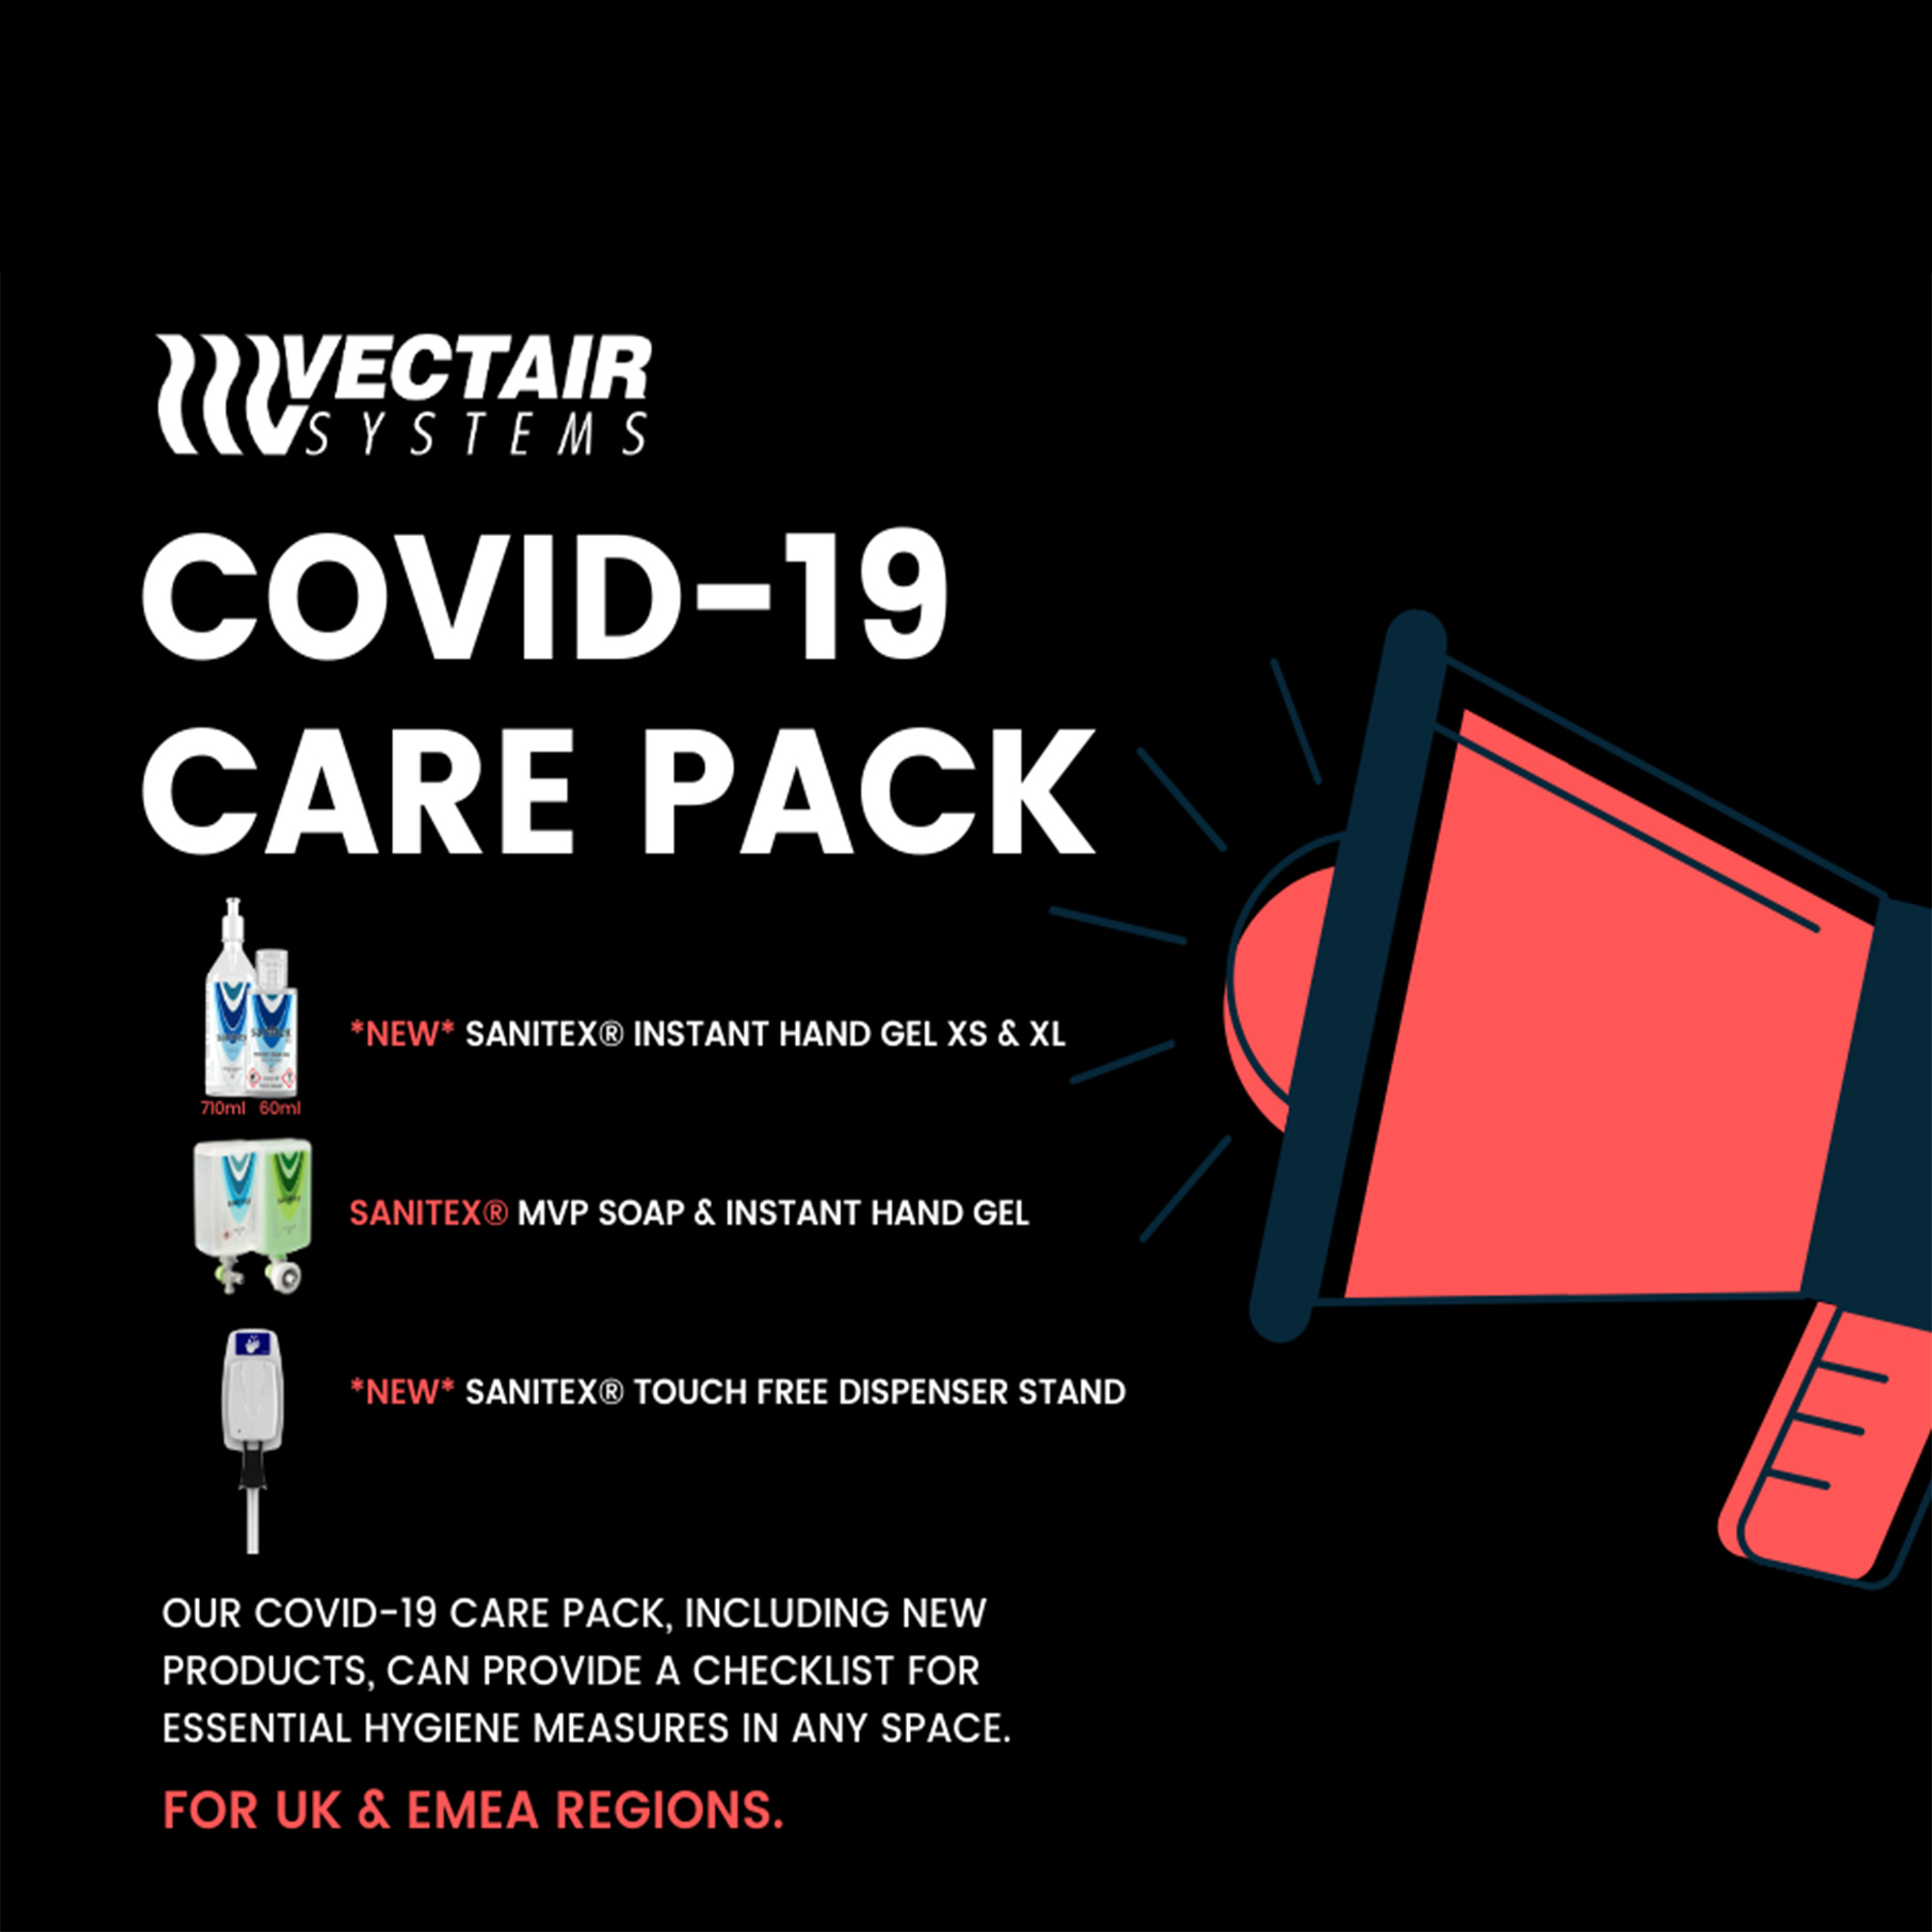 Covid-19 Care Pack